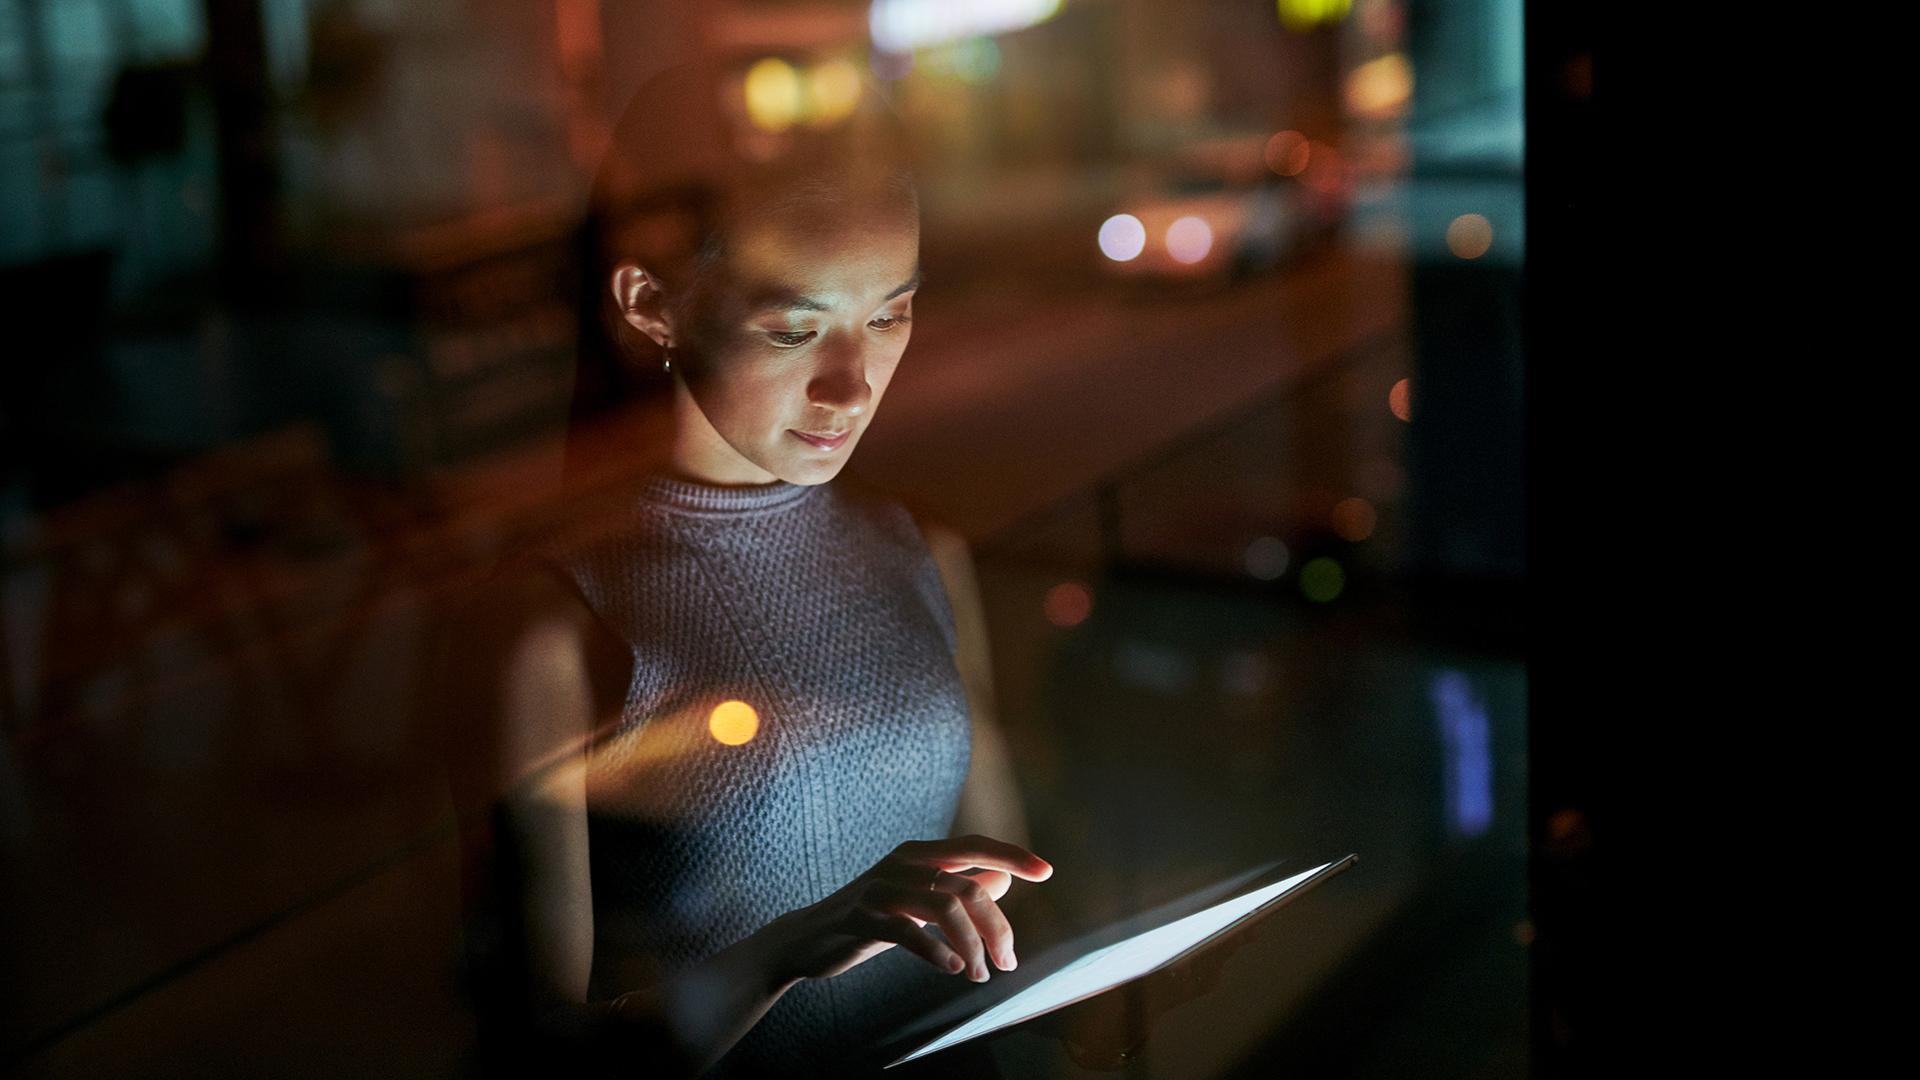 A woman standing in front of a window at night, working on ipad.